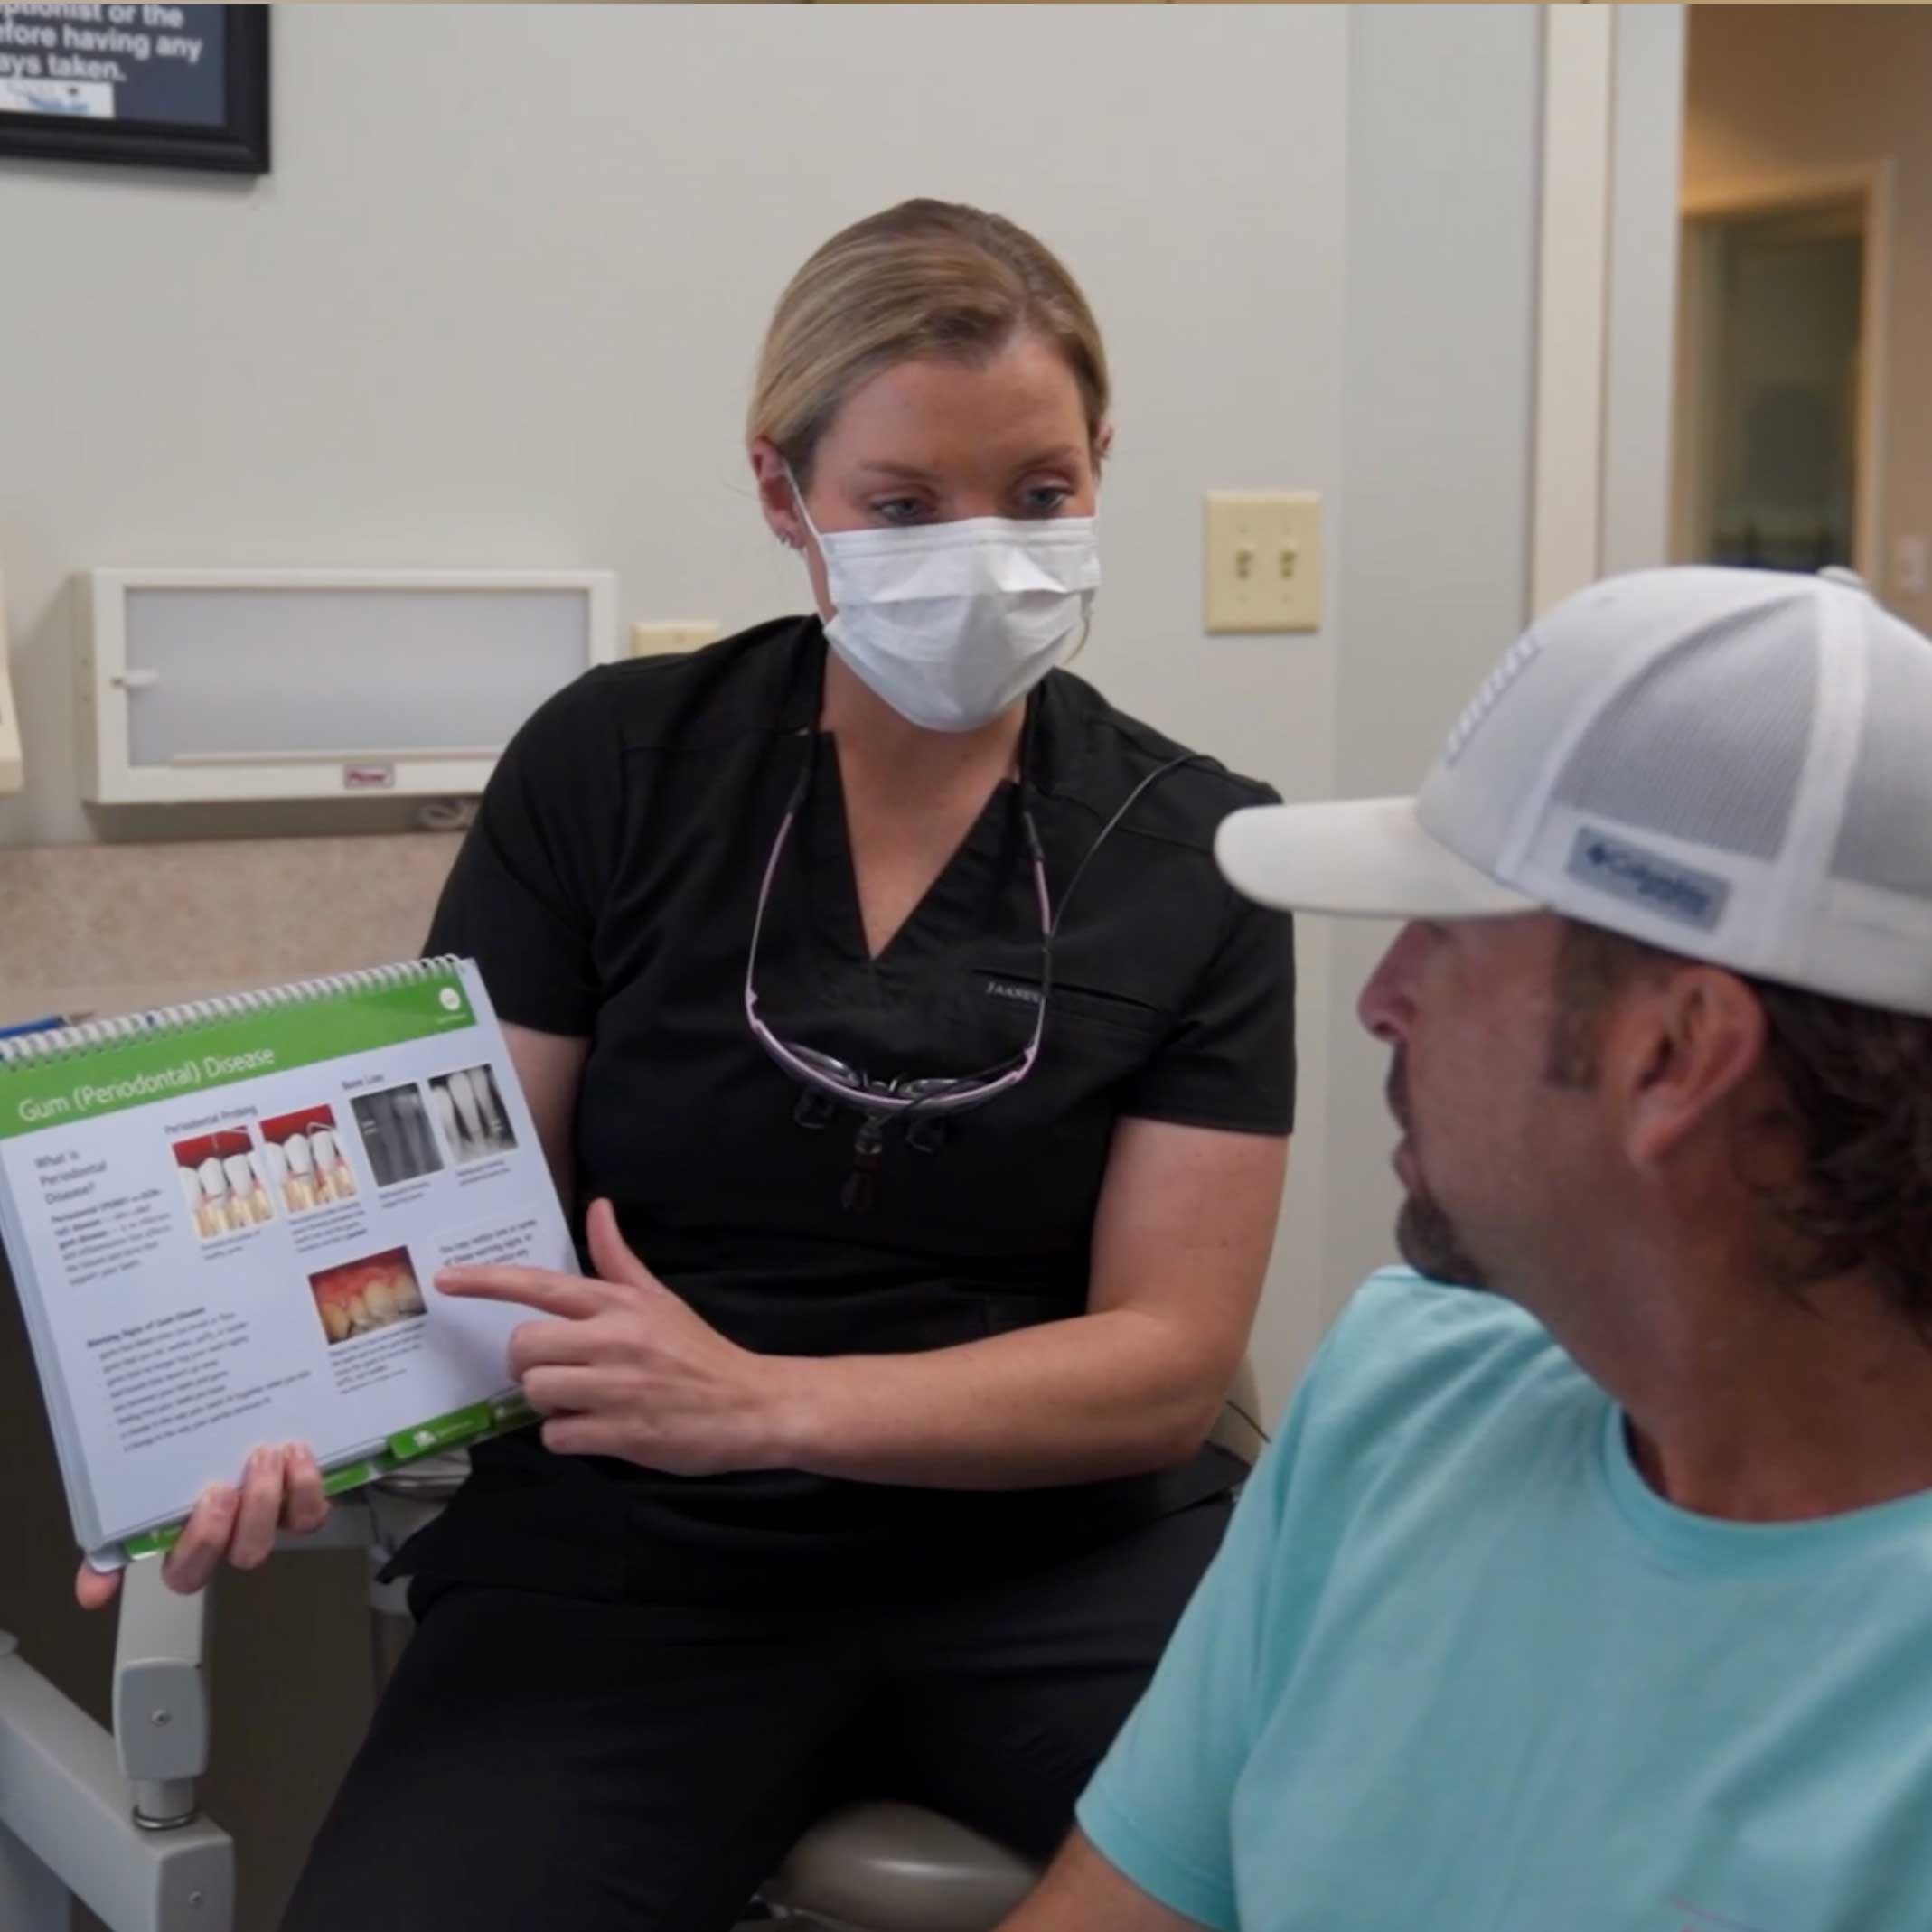 A dental assistant at Rocky Creek Dental Care in Greer, SC shows a tooth graphic and information to a patient at Rocky Creek Dental Care